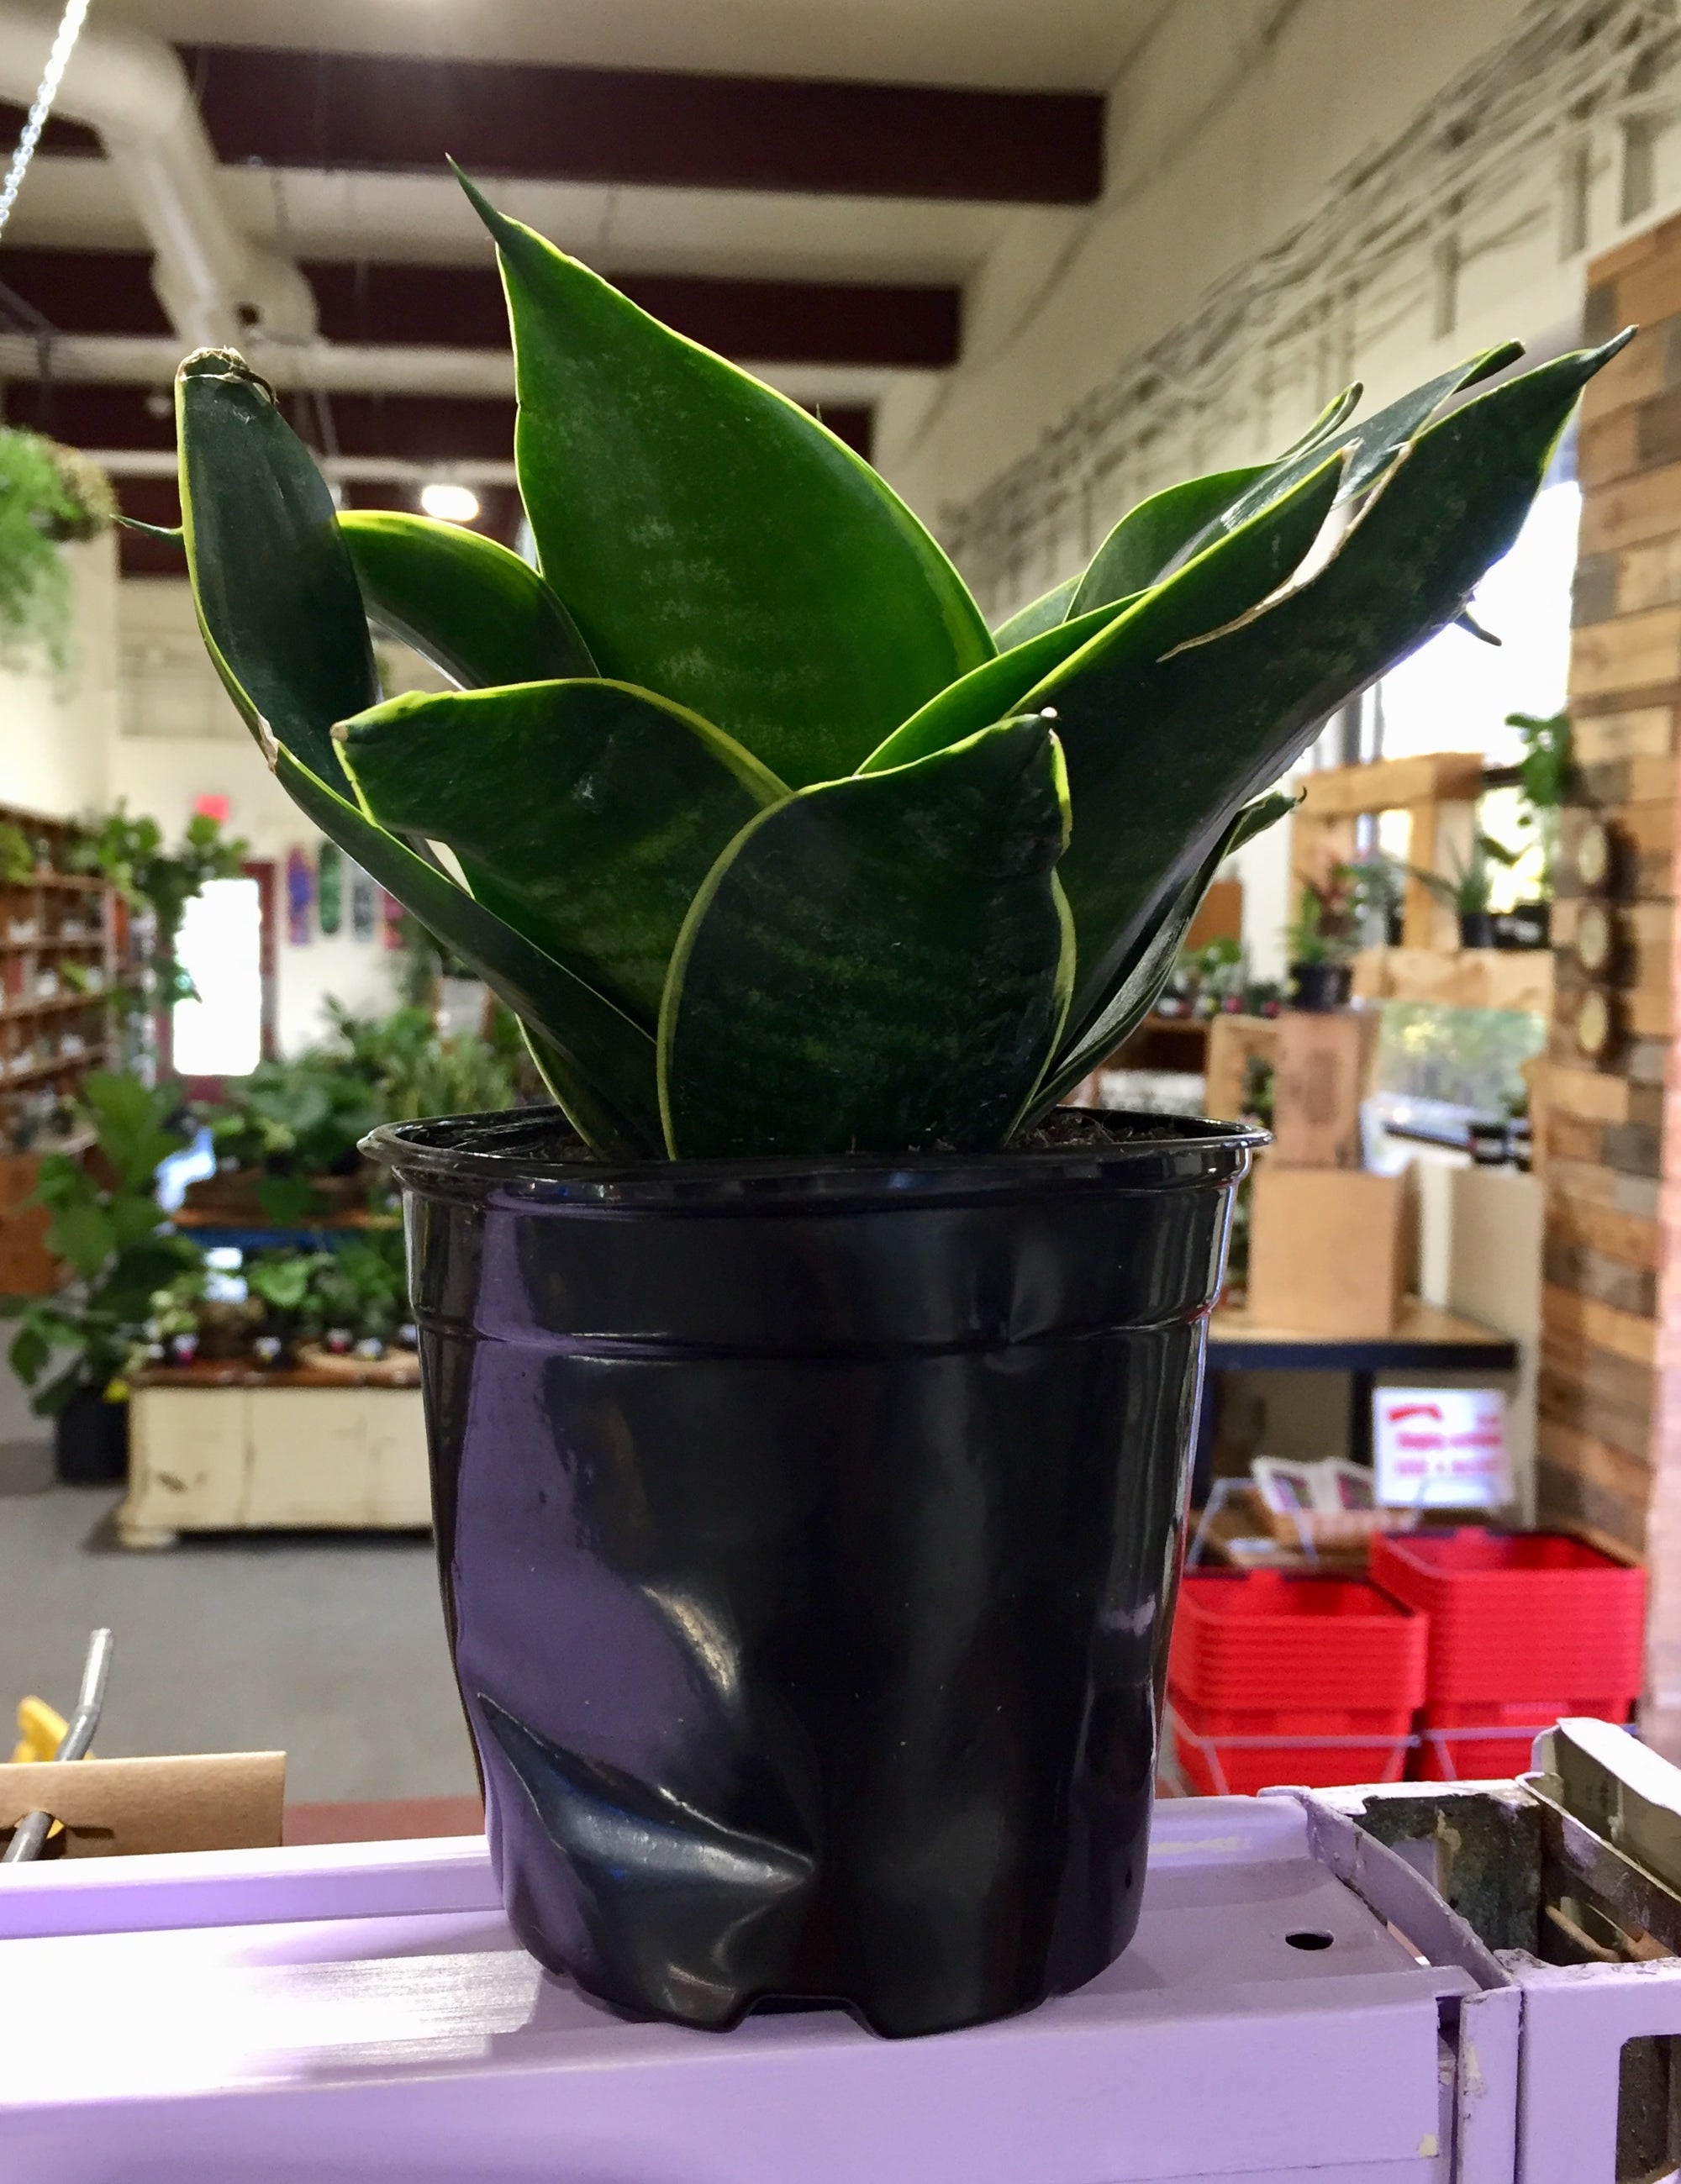 A potted plant with thick, long, spiked leaves. They are bright green with neon green to yellow variegation along the outside edge.